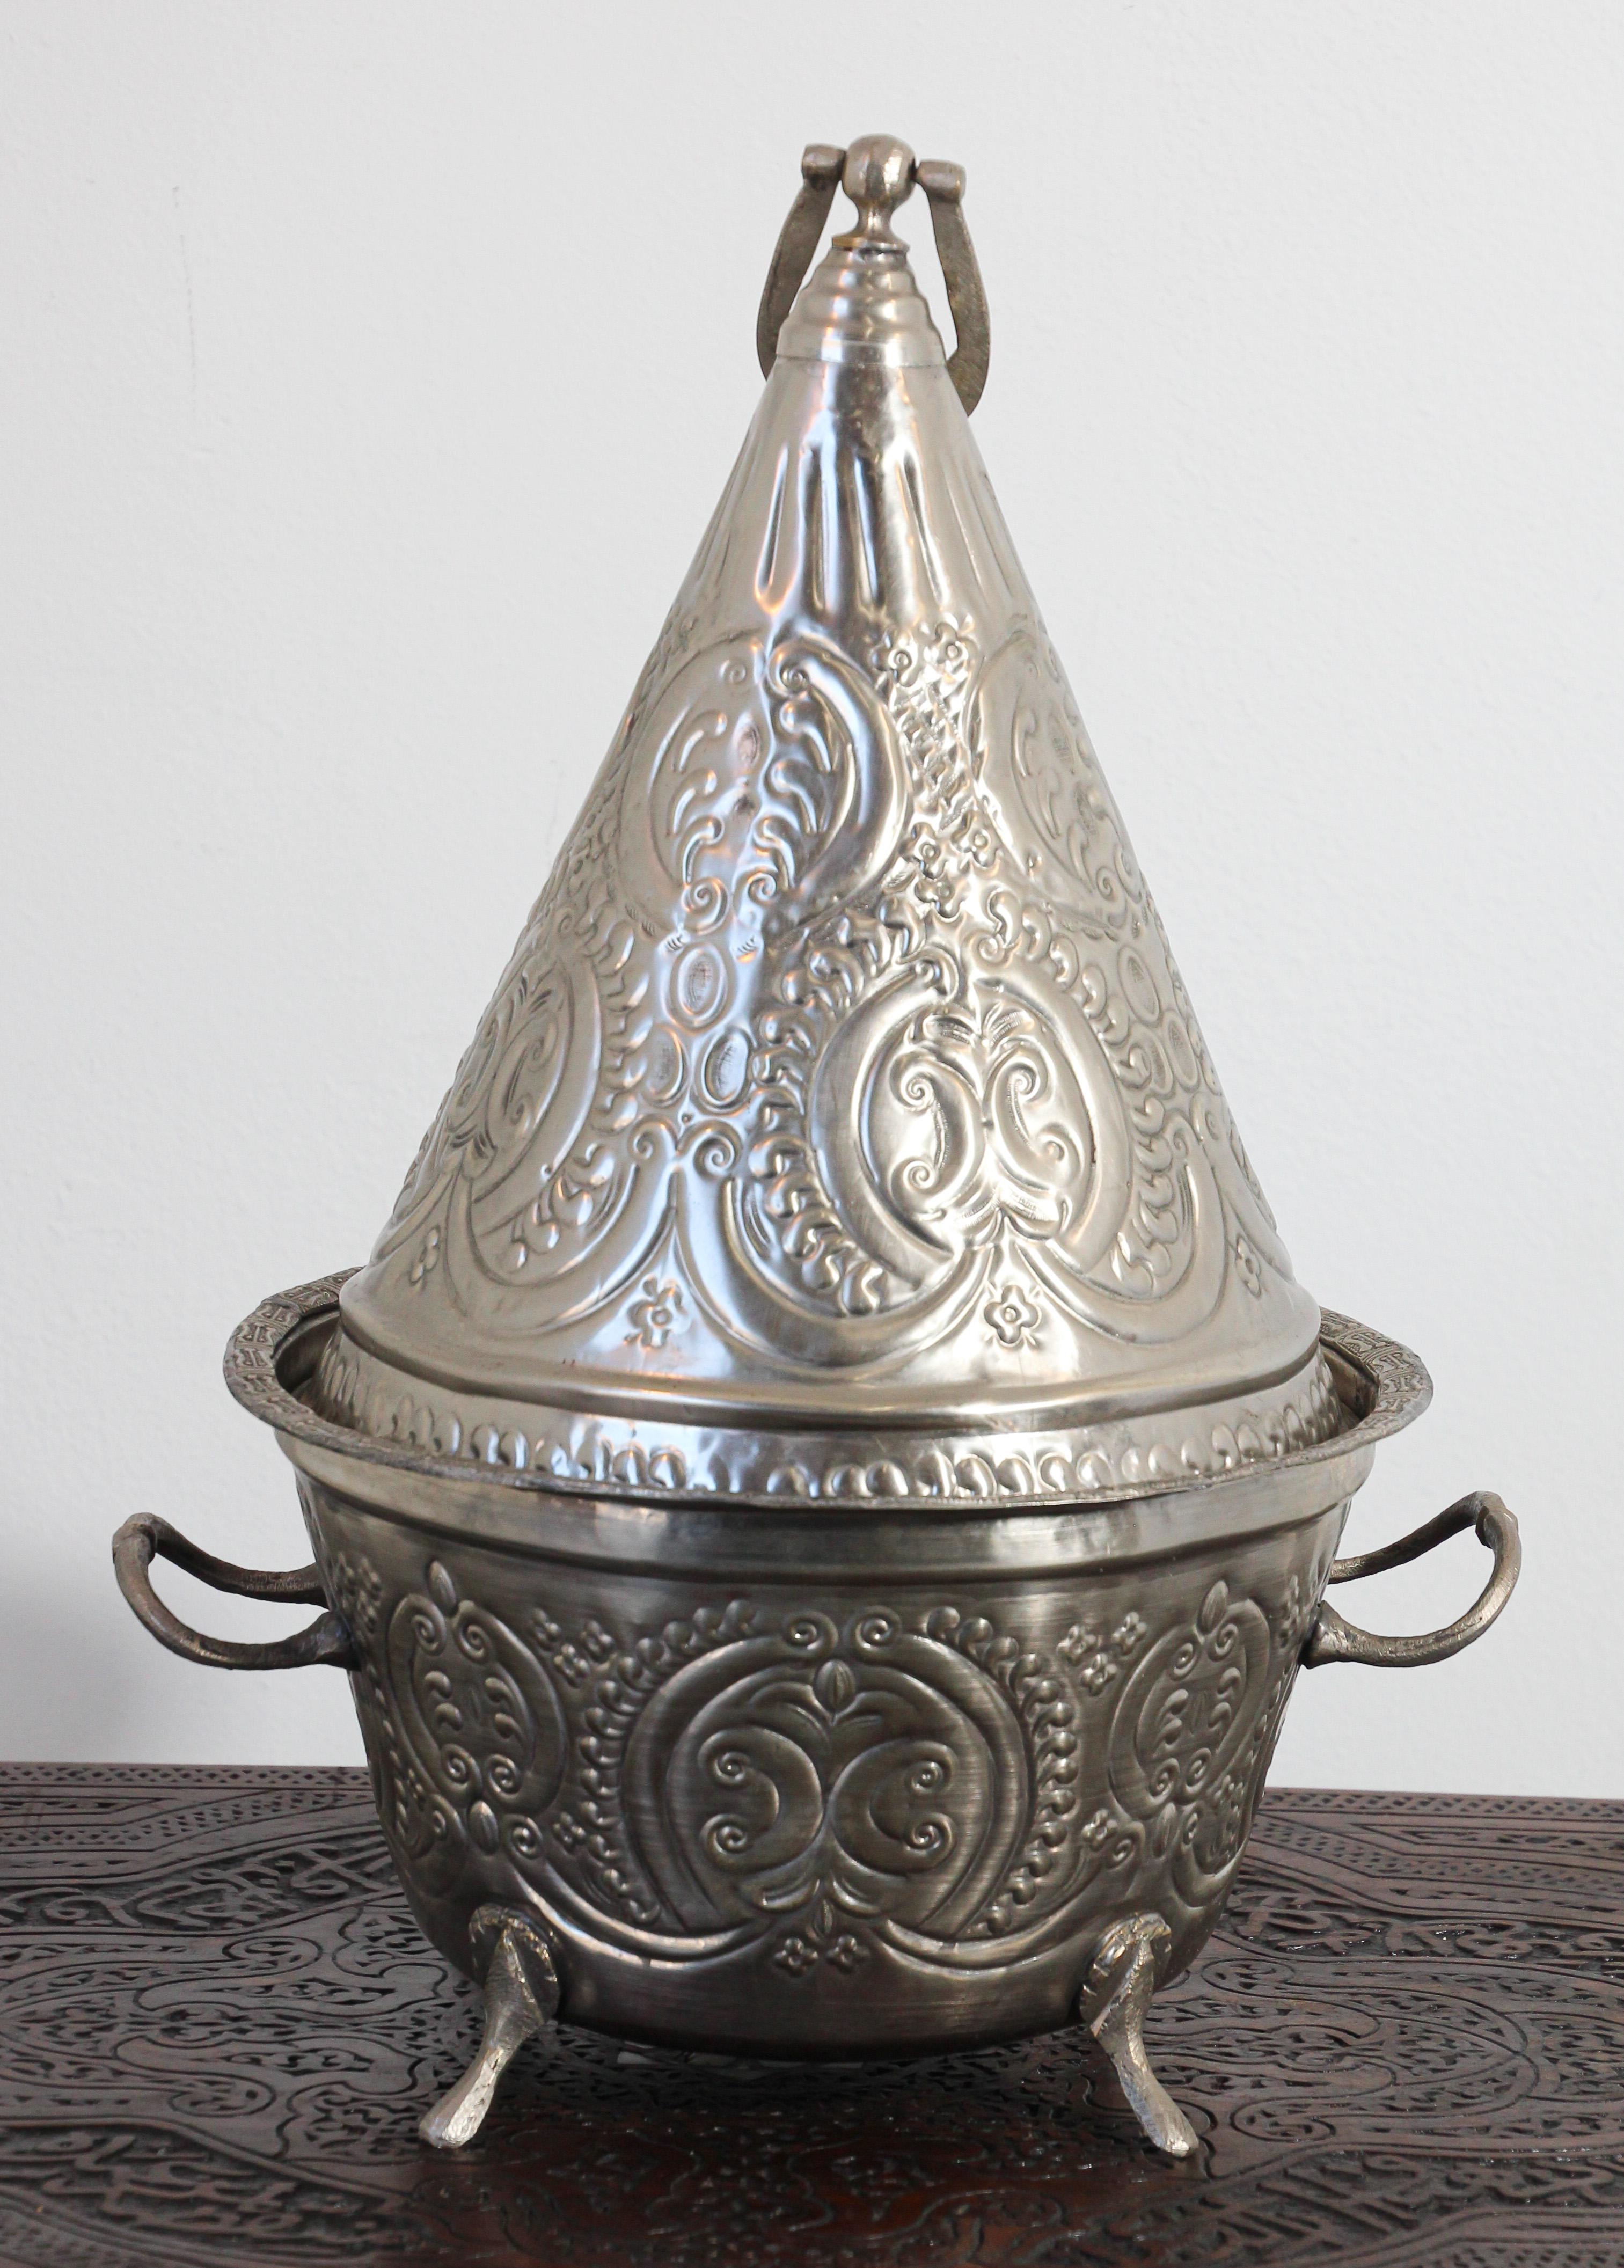 Gorgeous hand chased silver plated large Moroccan tajine dish with cover, typically used for presenting cookies or bread.
Hand chased etching and embossed motifs with metal silver finish serving dish vessel.
Very nice handcrafted large serving